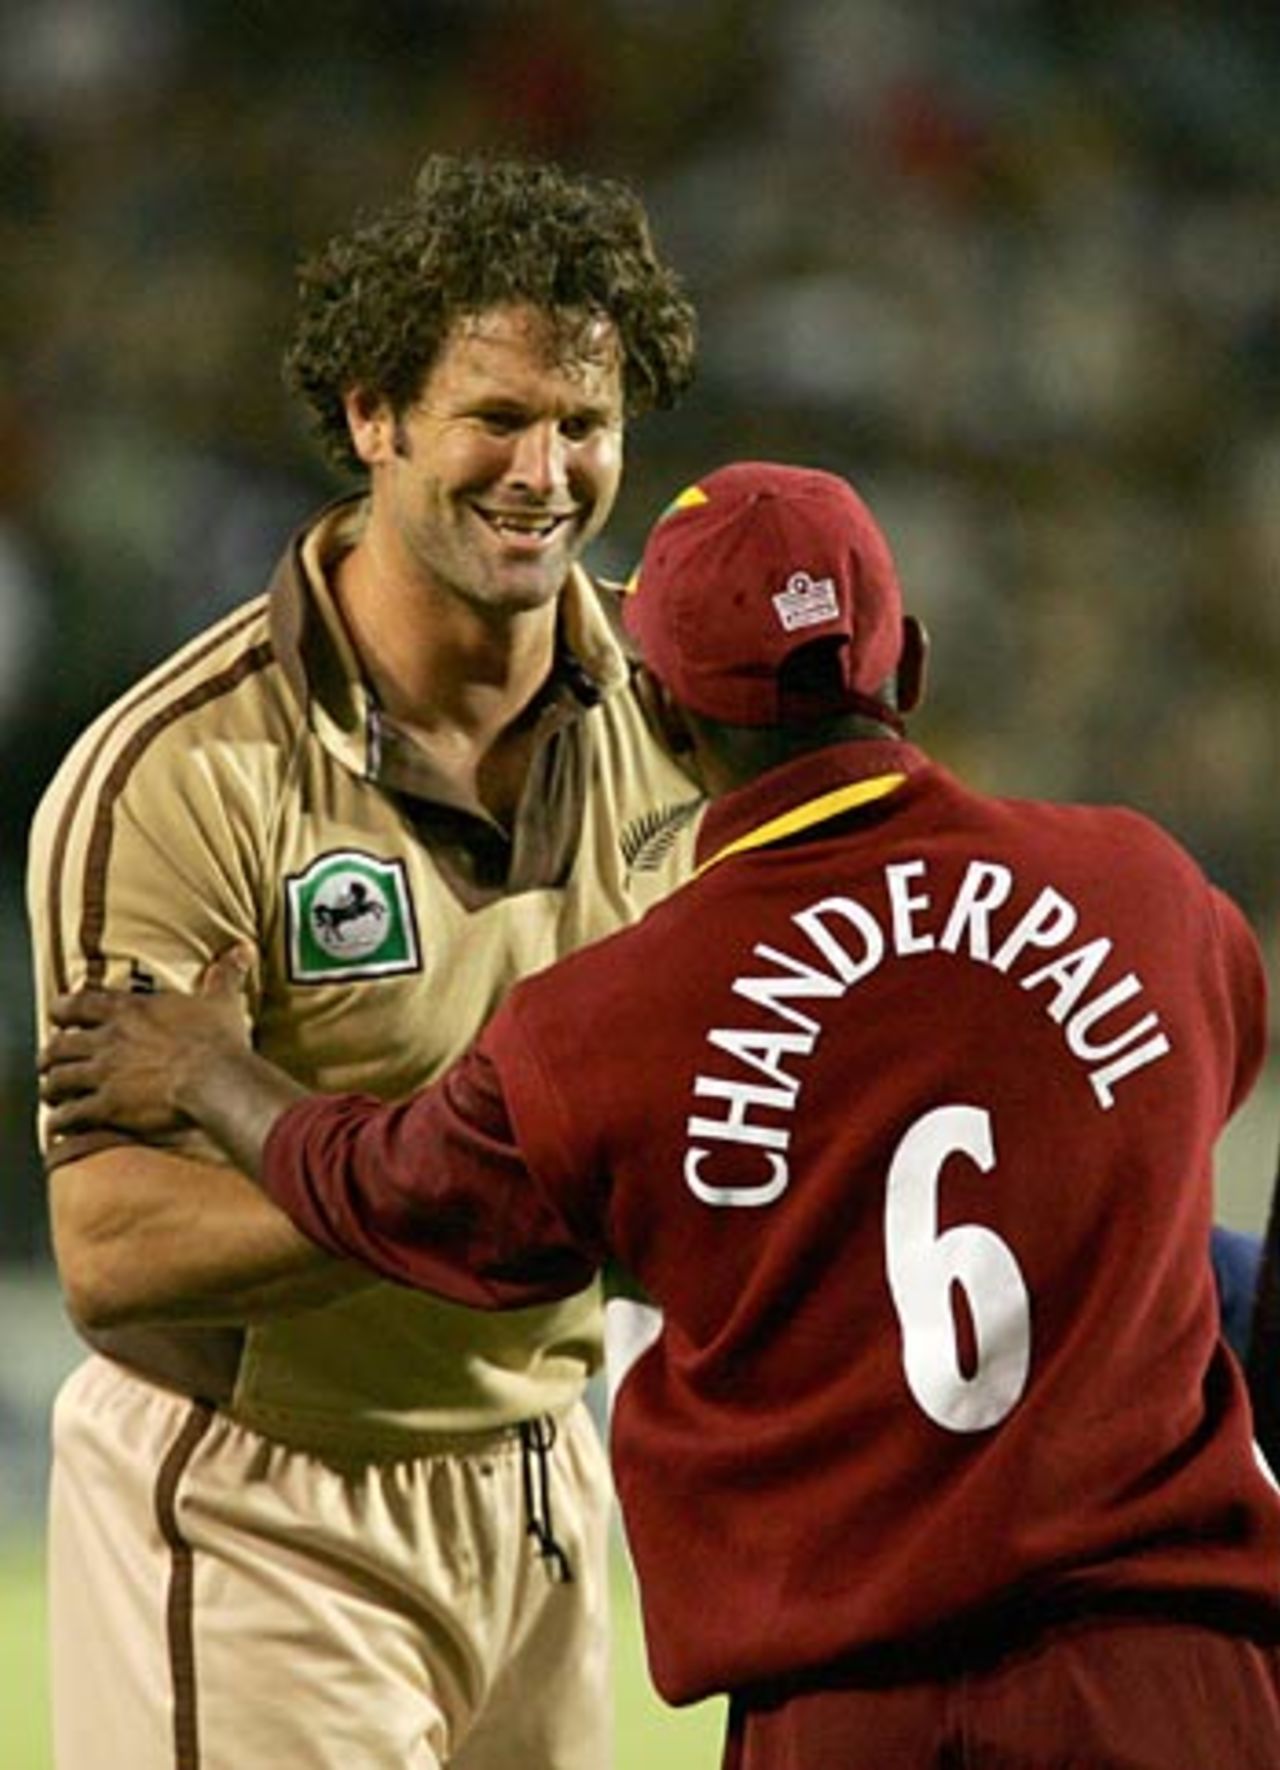 Shiv Chanderpaul shakes hands with Chris Cairns on his final appearance, New Zealand v West Indies, Twenty20, Auckland, February 16, 2006